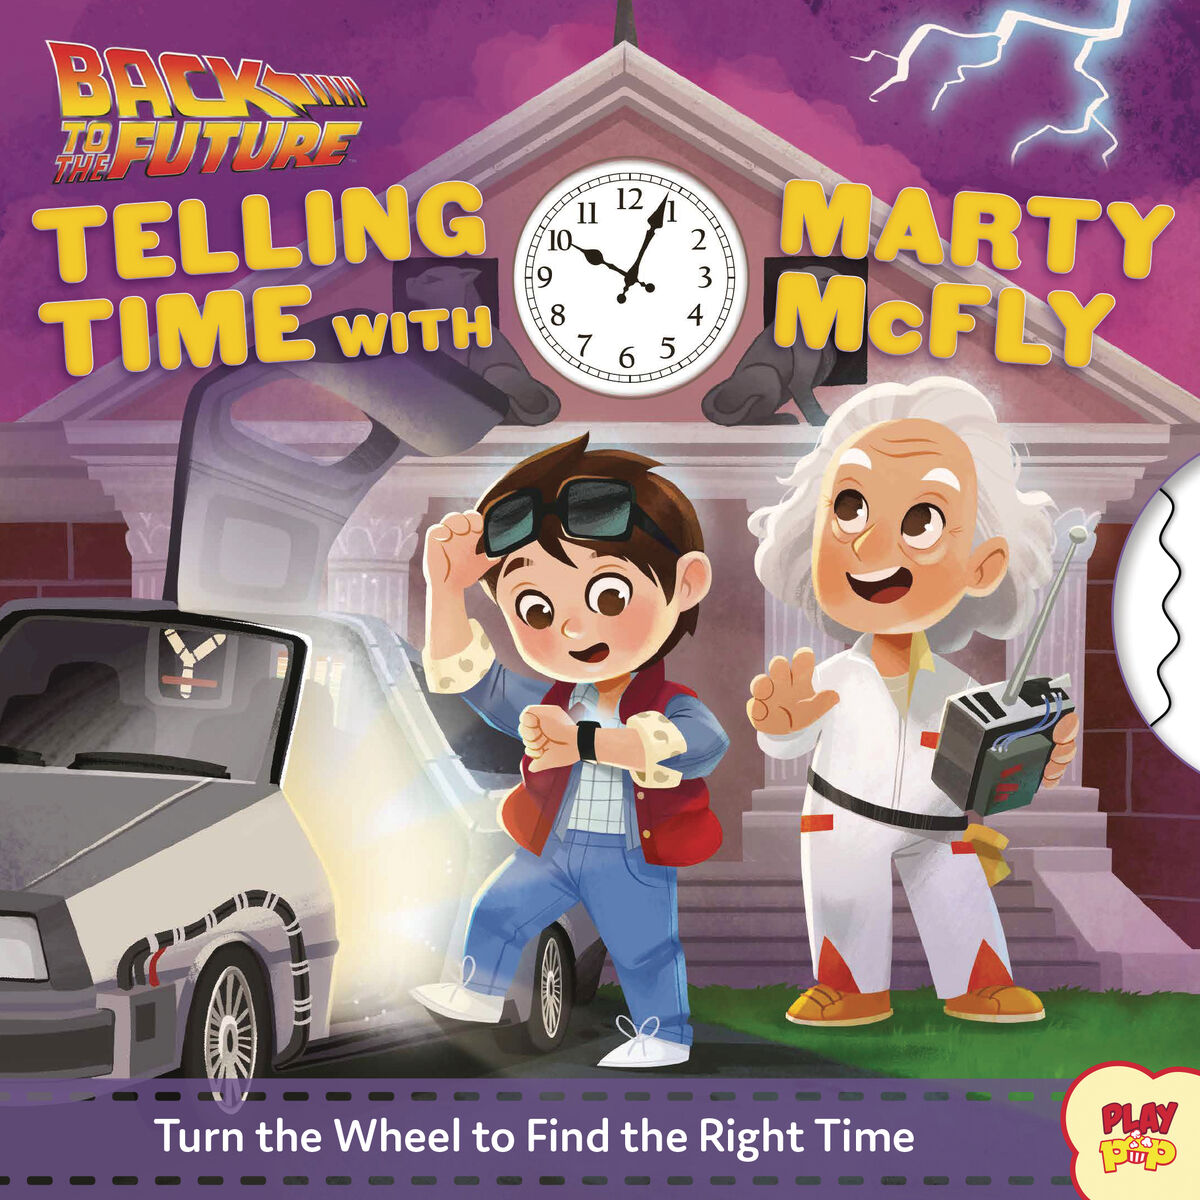 Назад в будущее книга. Back of the Future книга. Back to the Future book telling time with Marty MCFLY. Back to the Future back to time.